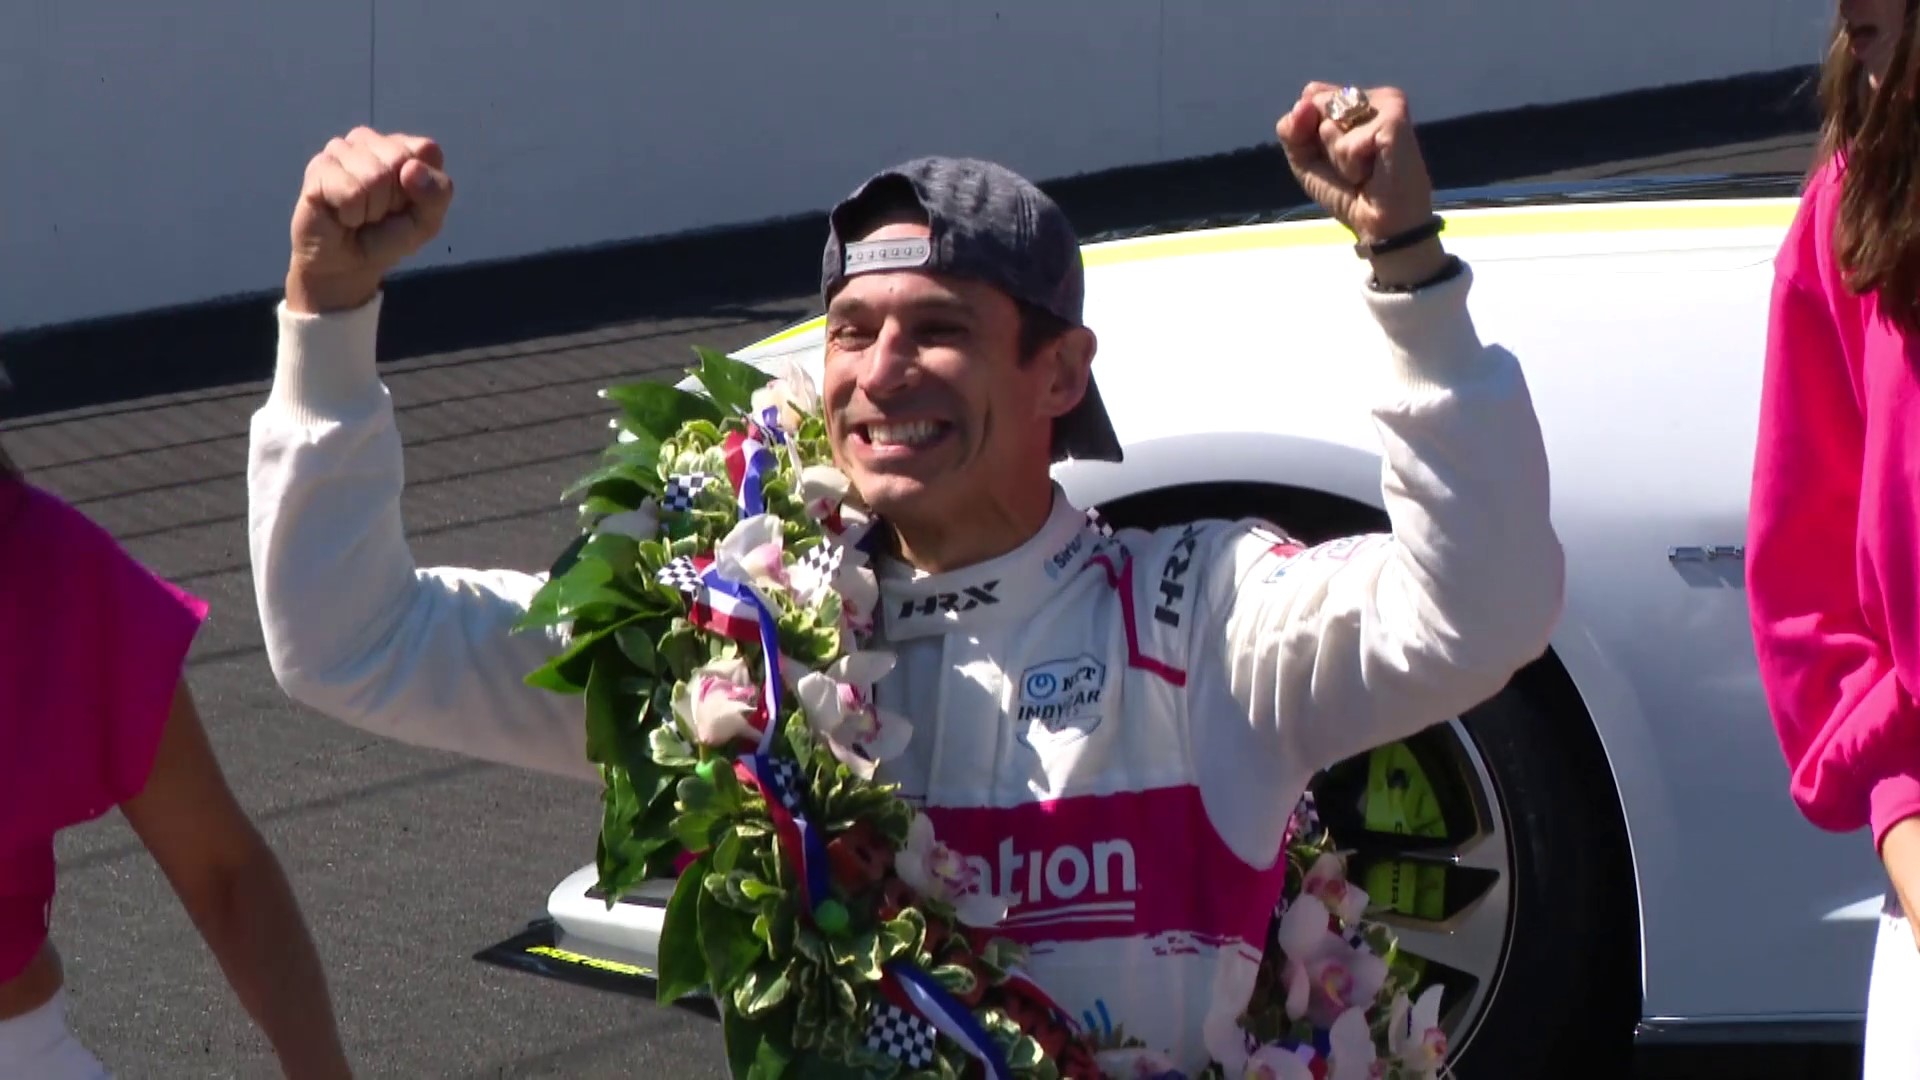 In 2021, Helio Castroneves joined an exclusive club with his 4th Indianapolis win. WTHR followed Helio from start to finish.